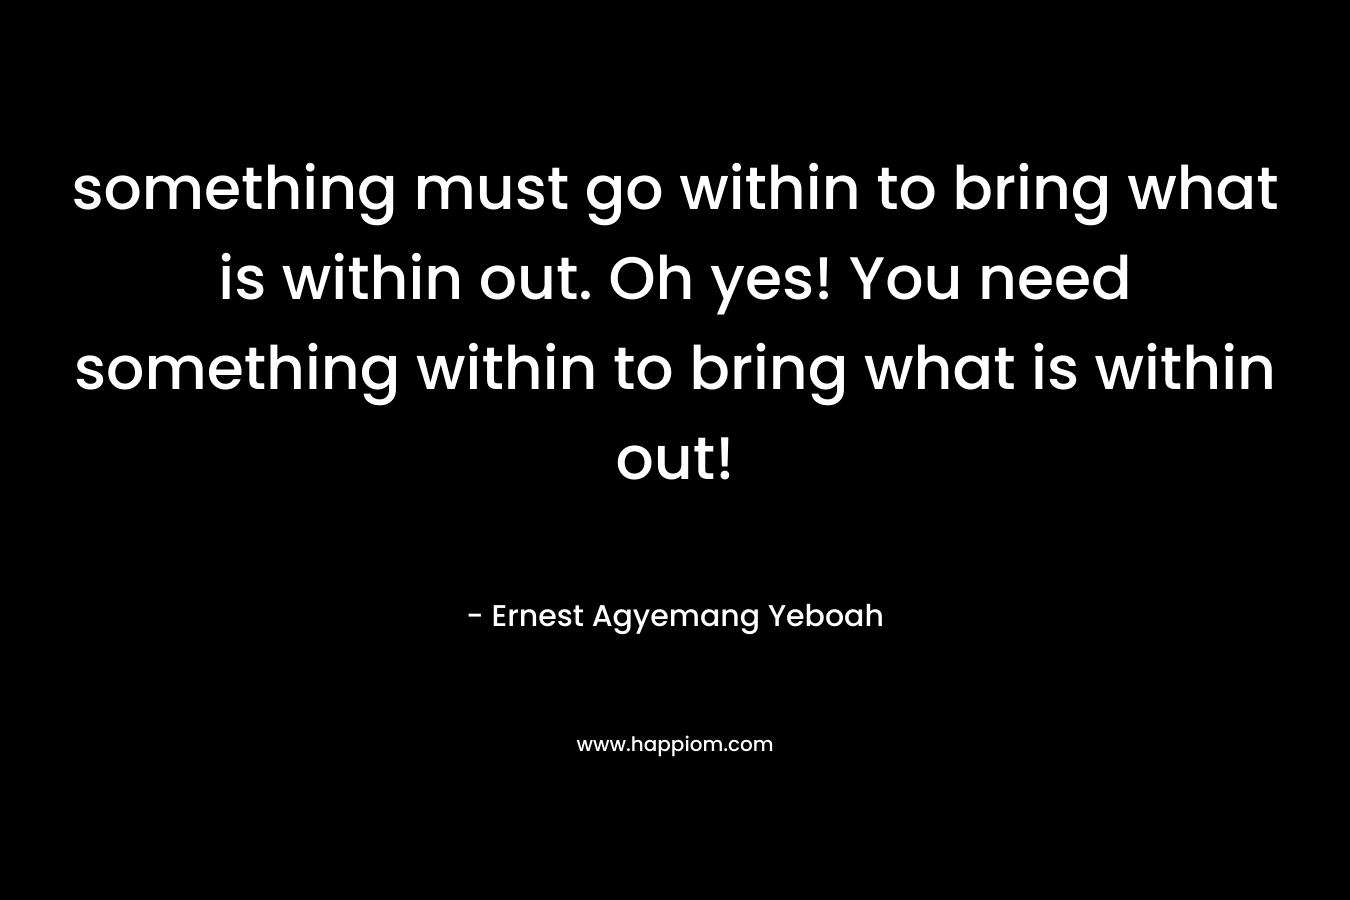 something must go within to bring what is within out. Oh yes! You need something within to bring what is within out!